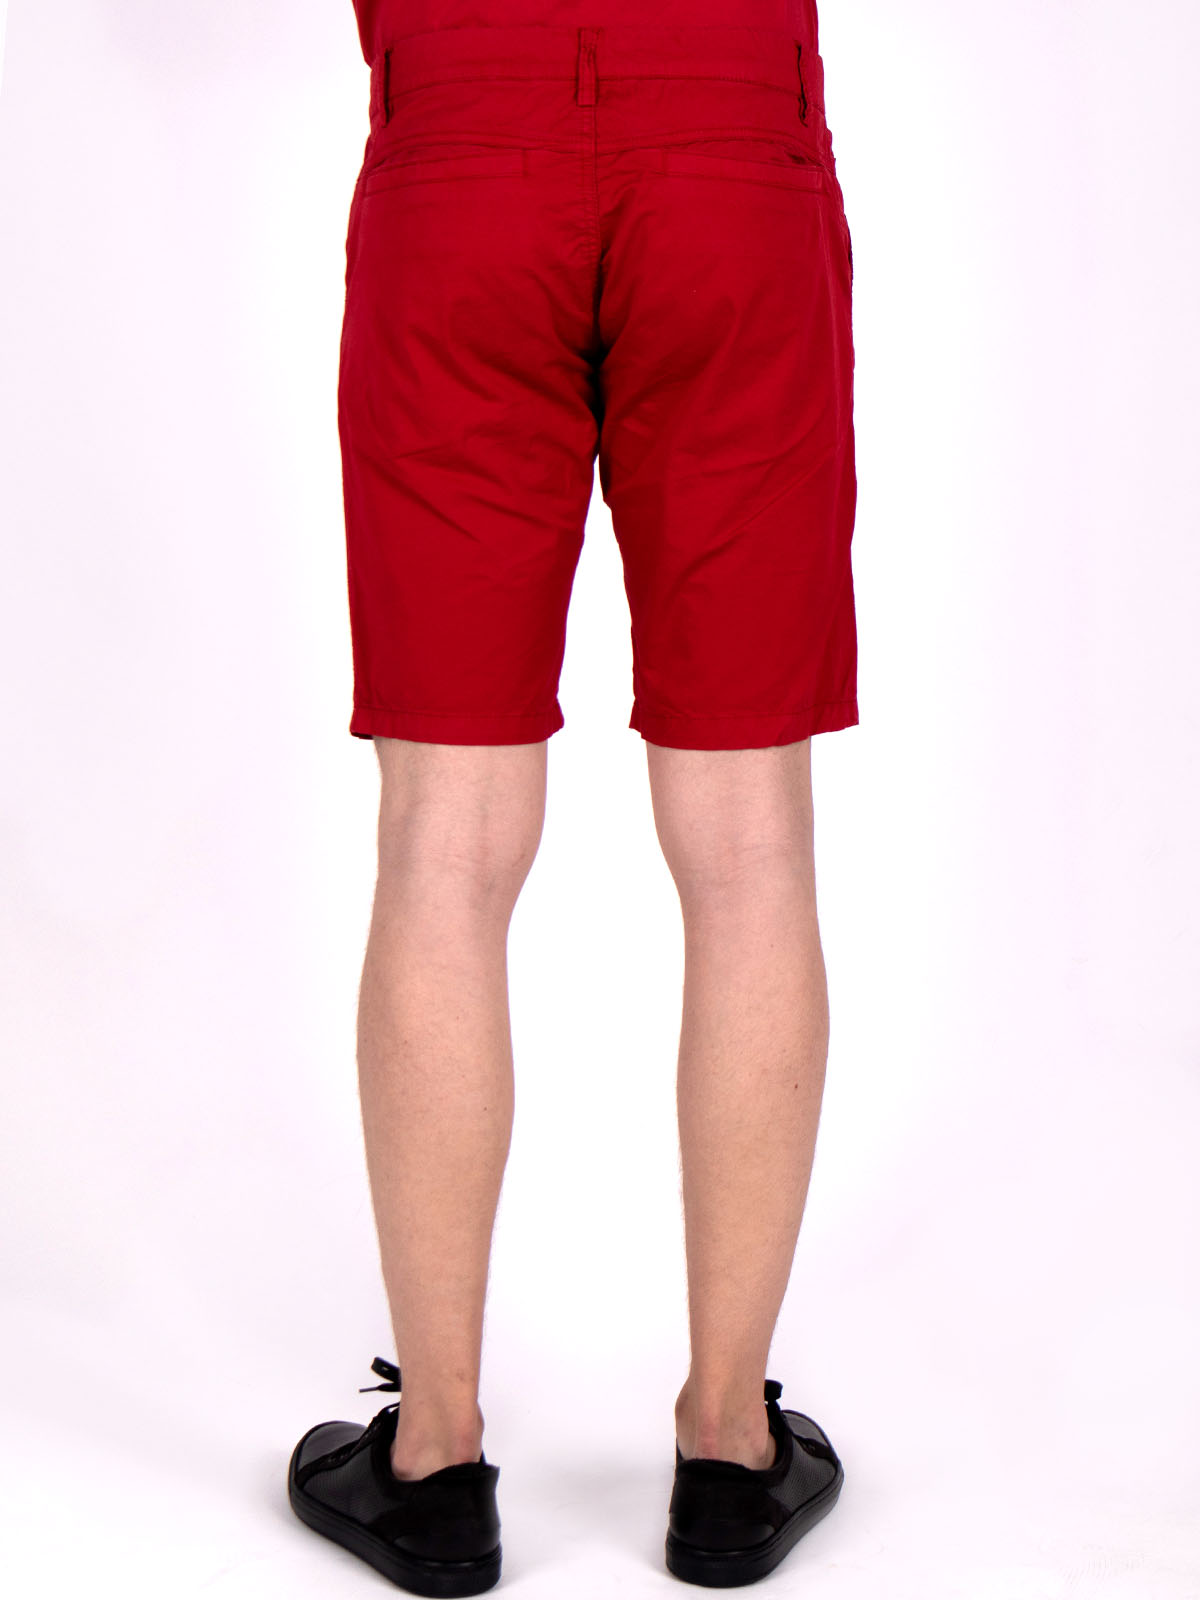  red shorts  - 67062 € 27.00 img3